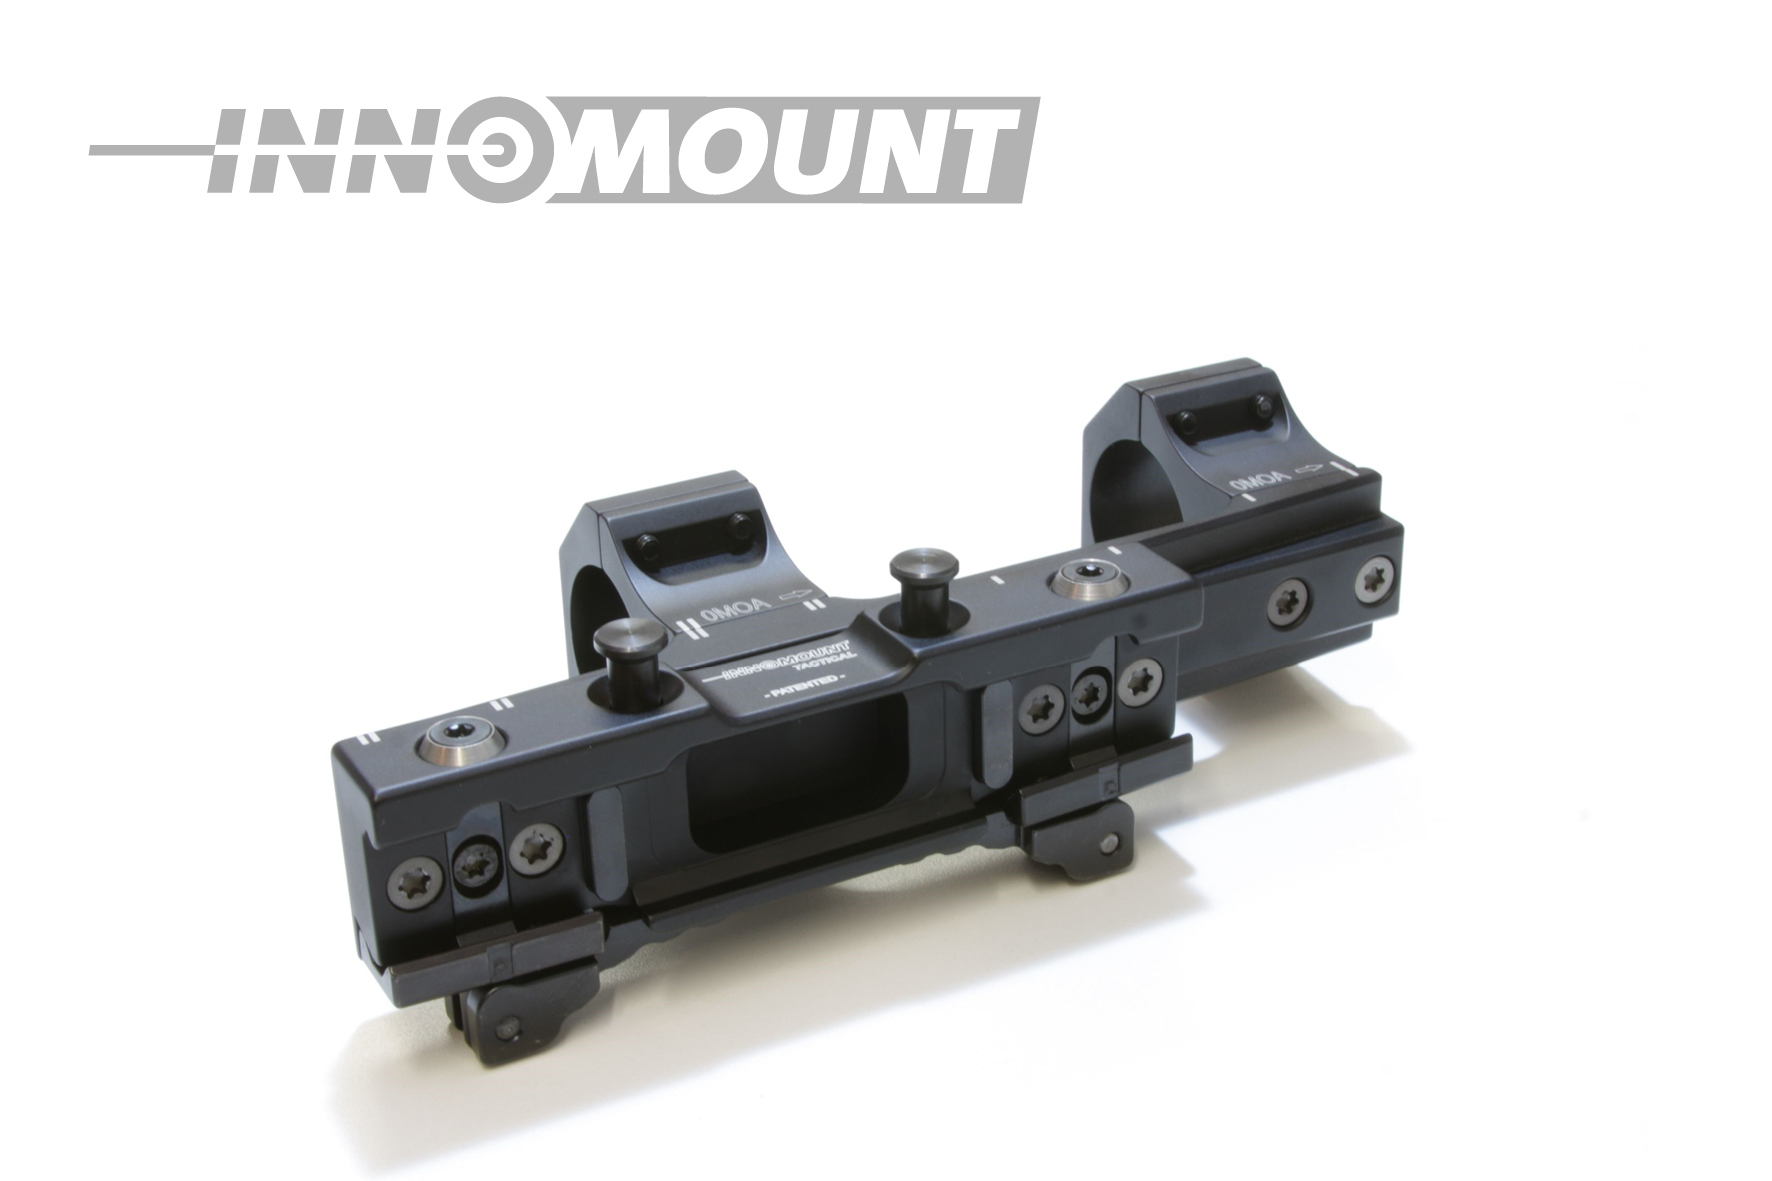 Tactical Quick Release Mount - Flex - Cantilever - Ring 34mm - CH 32mm - 0-20MOA